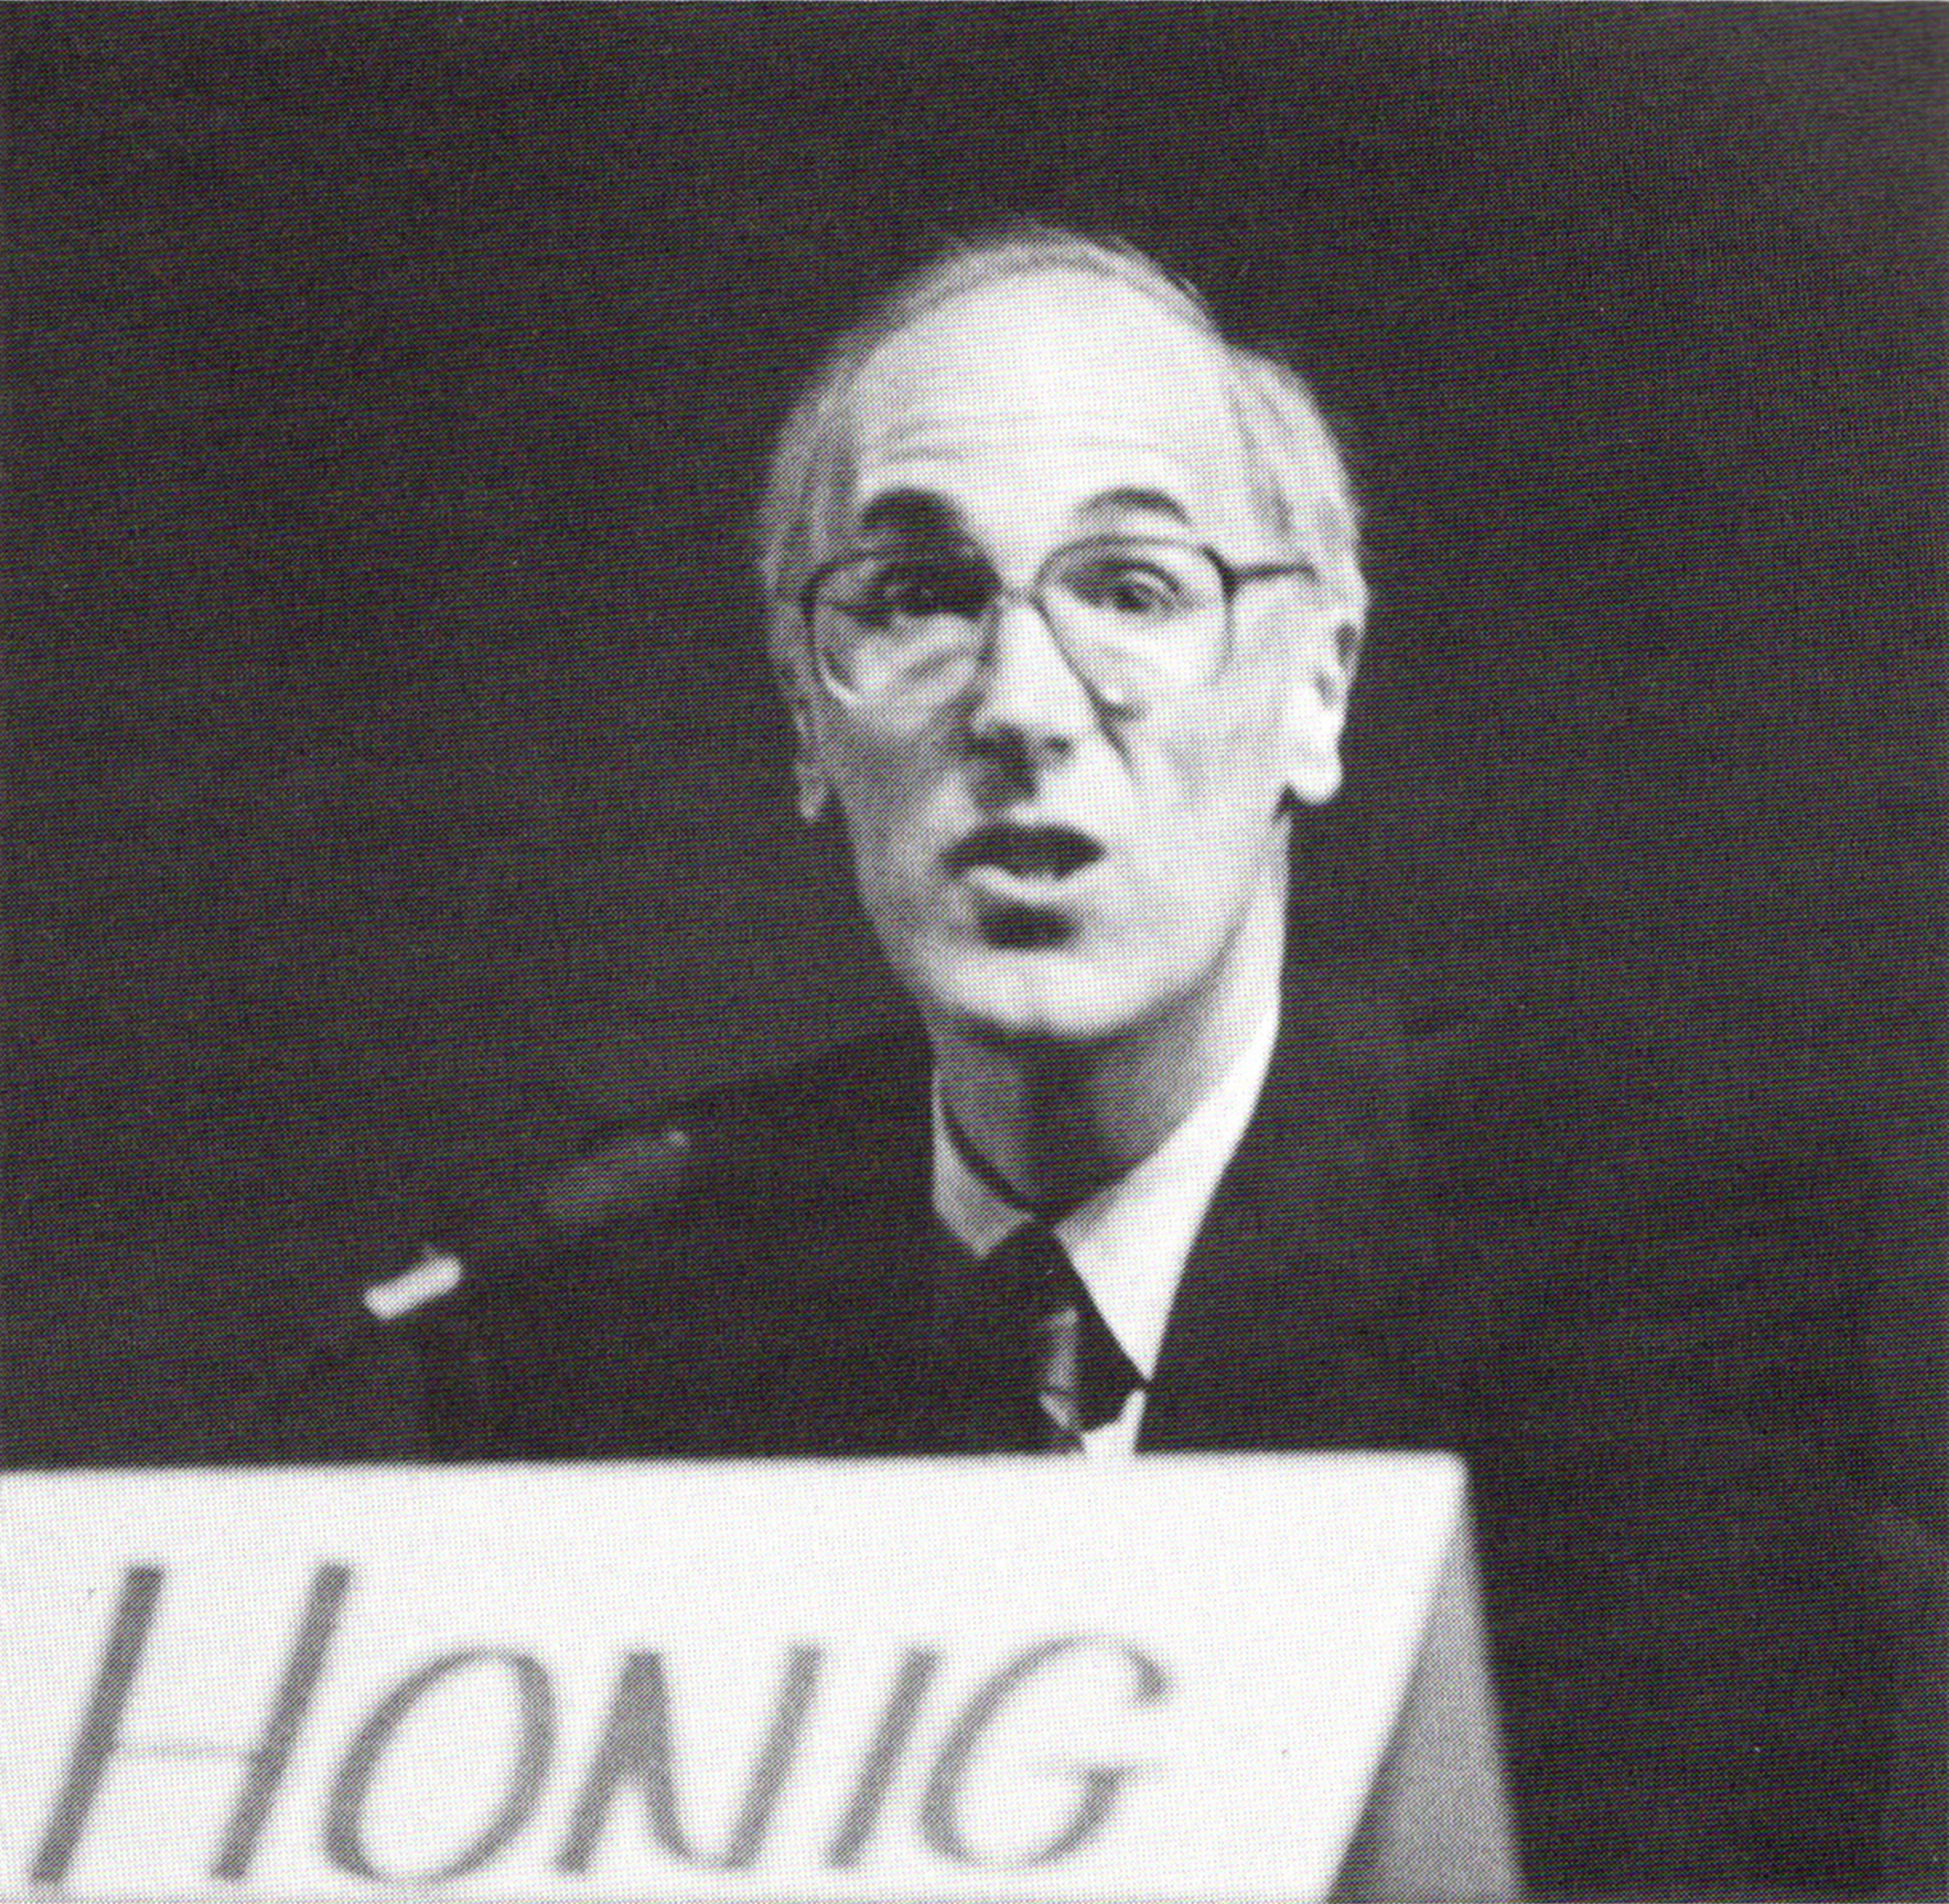 Black and white photo of Bill Honig sitting at a table with a name tag in front of him